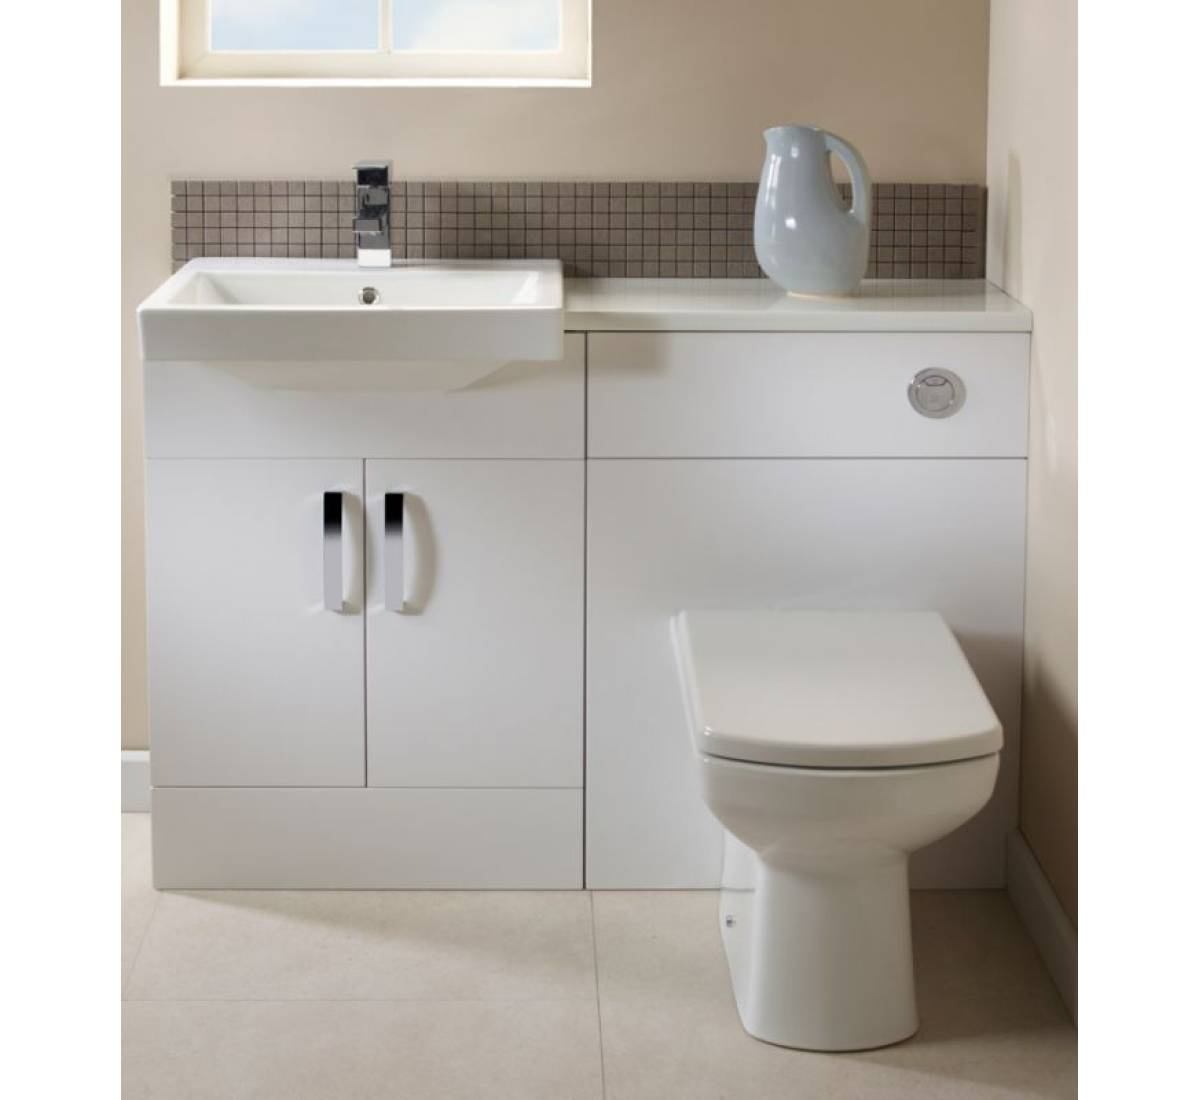 Fitted Bathroom Furniture • Faucet Ideas Site